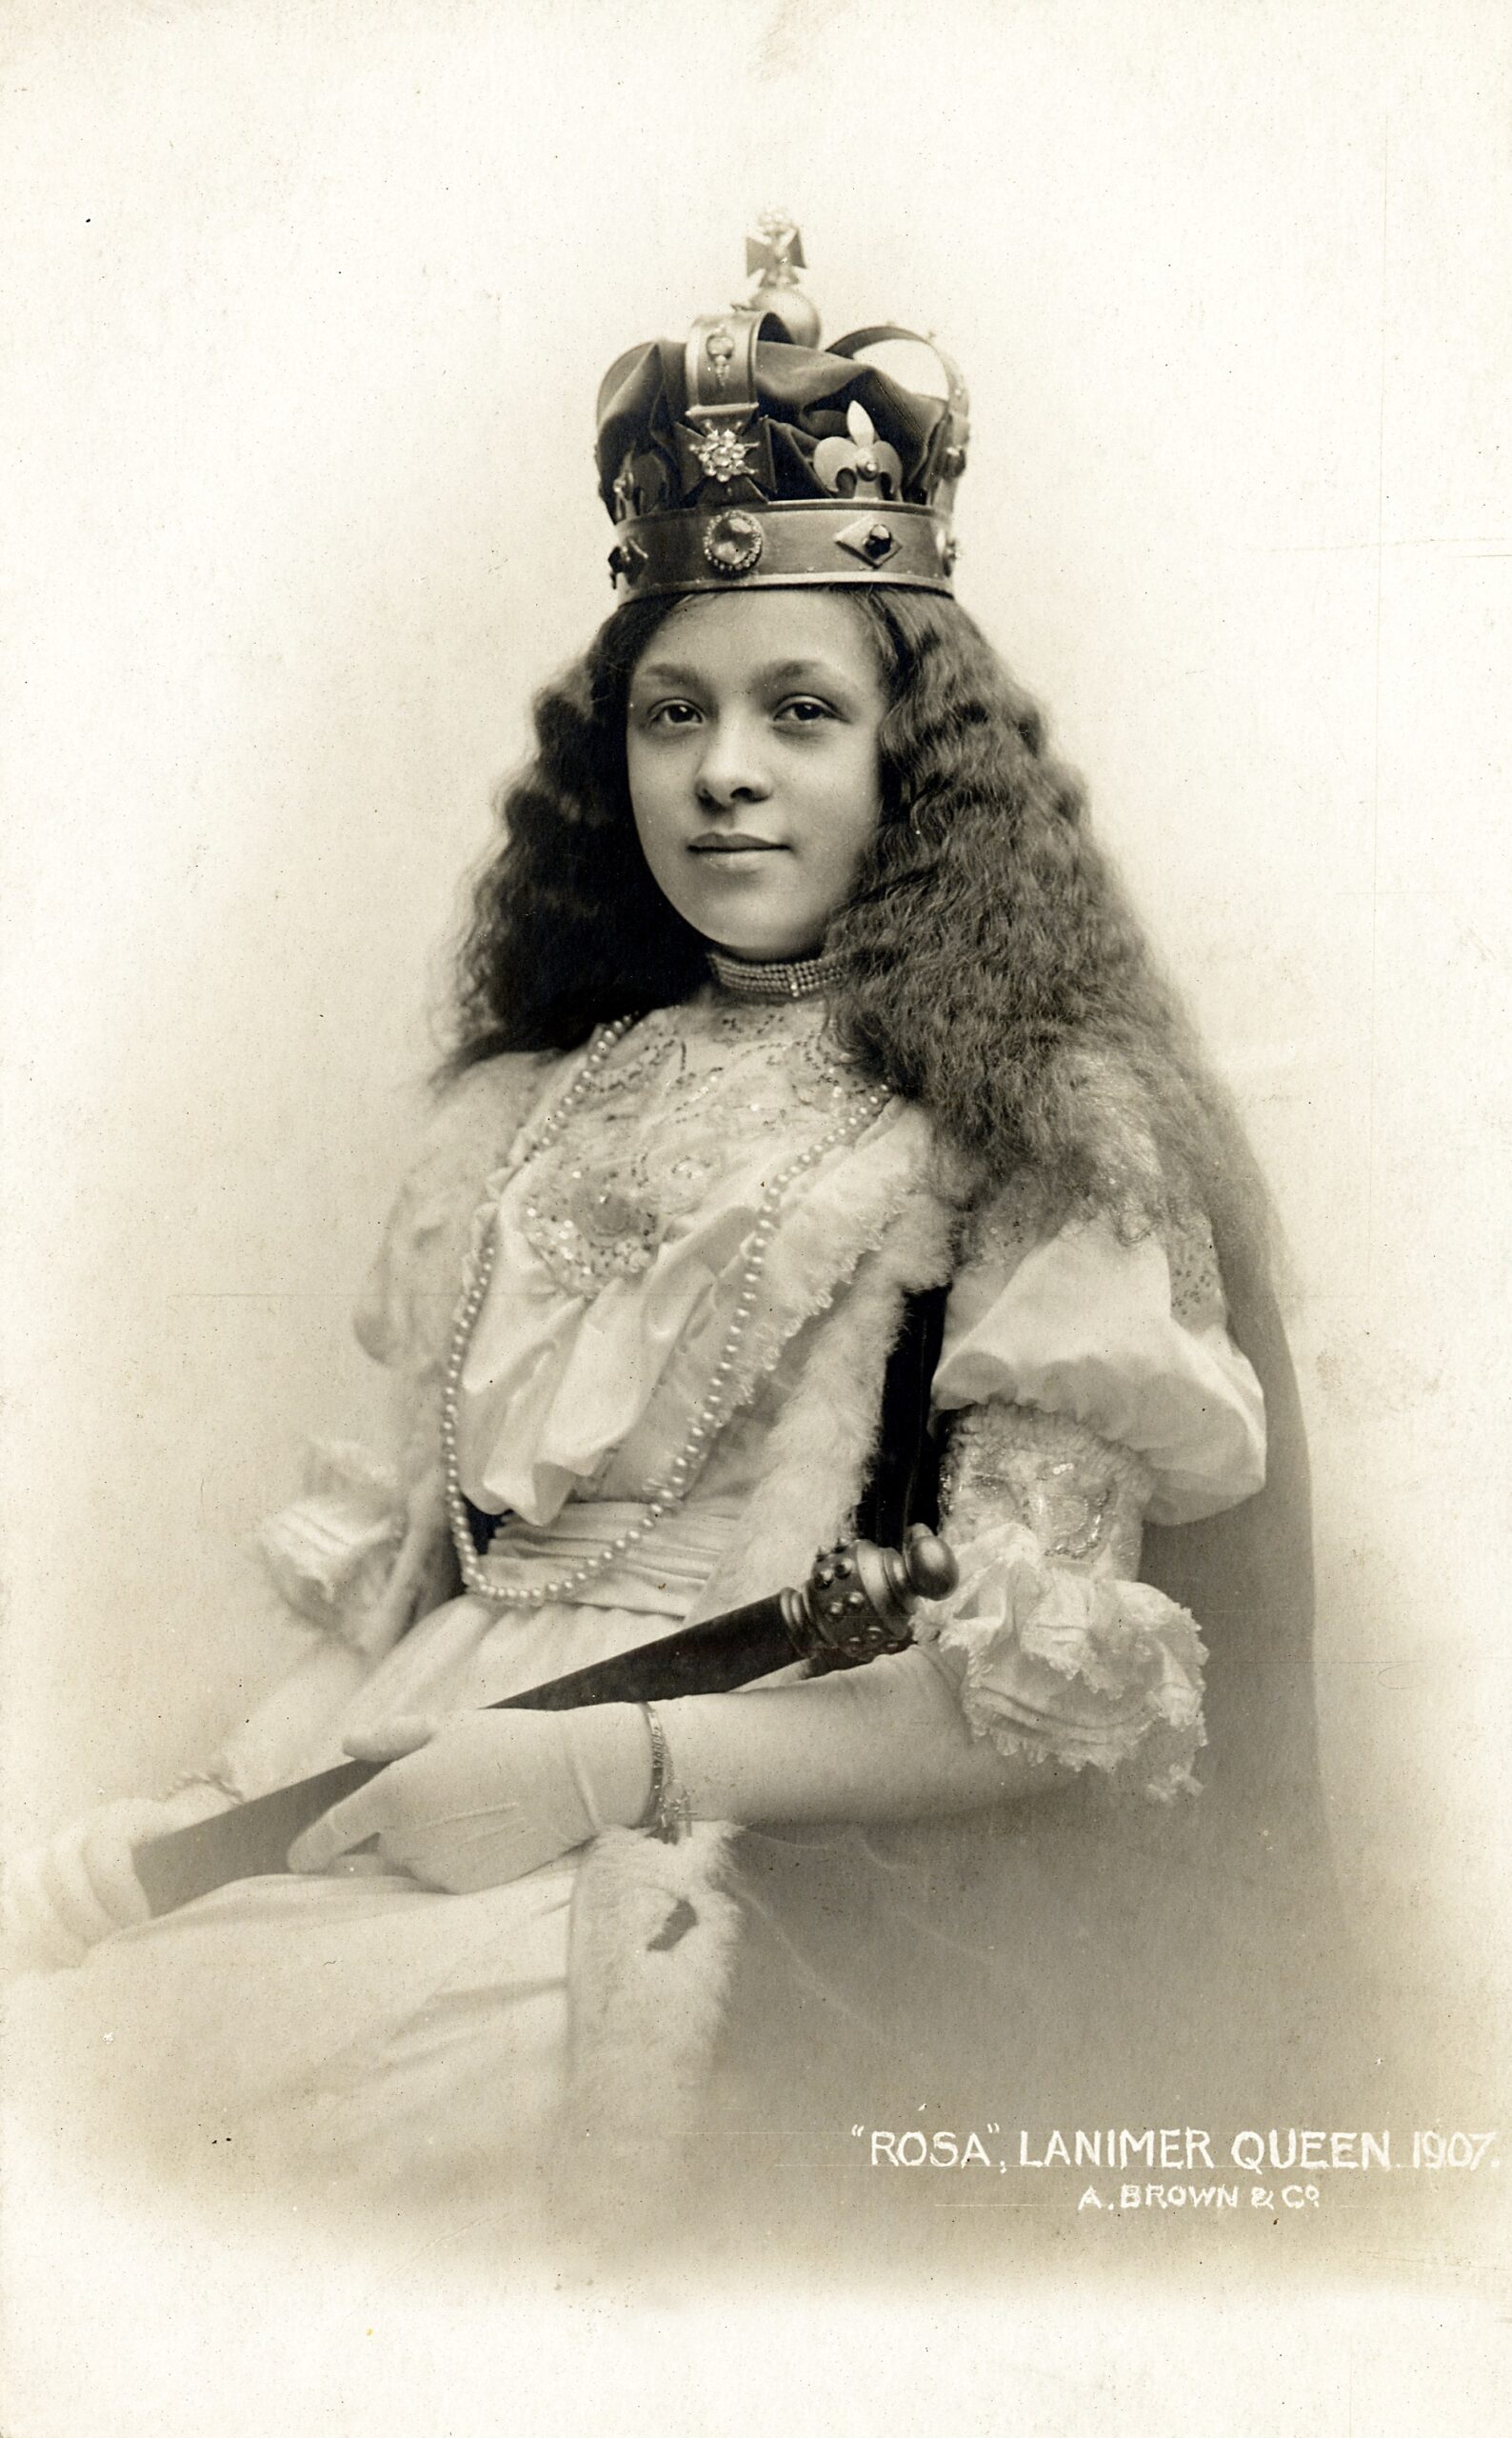 Archive photo of Italian Scot Maria Rosa Minchella wearing a crown and scepter and a long dress